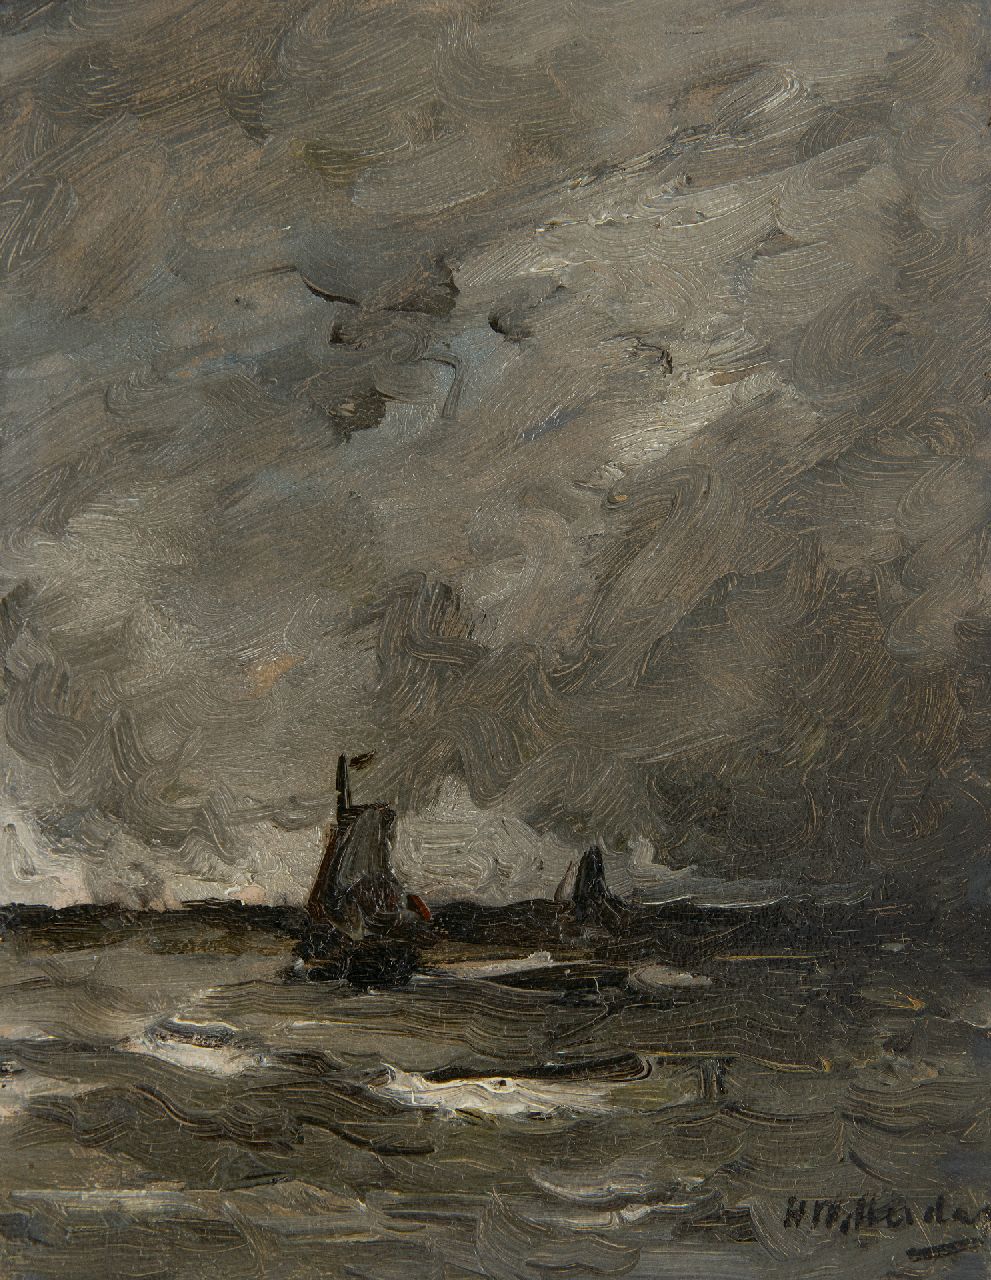 Mesdag H.W.  | Hendrik Willem Mesdag | Paintings offered for sale | Fishing ships in a storm, oil on panel 19.0 x 15.0 cm, signed l.r.